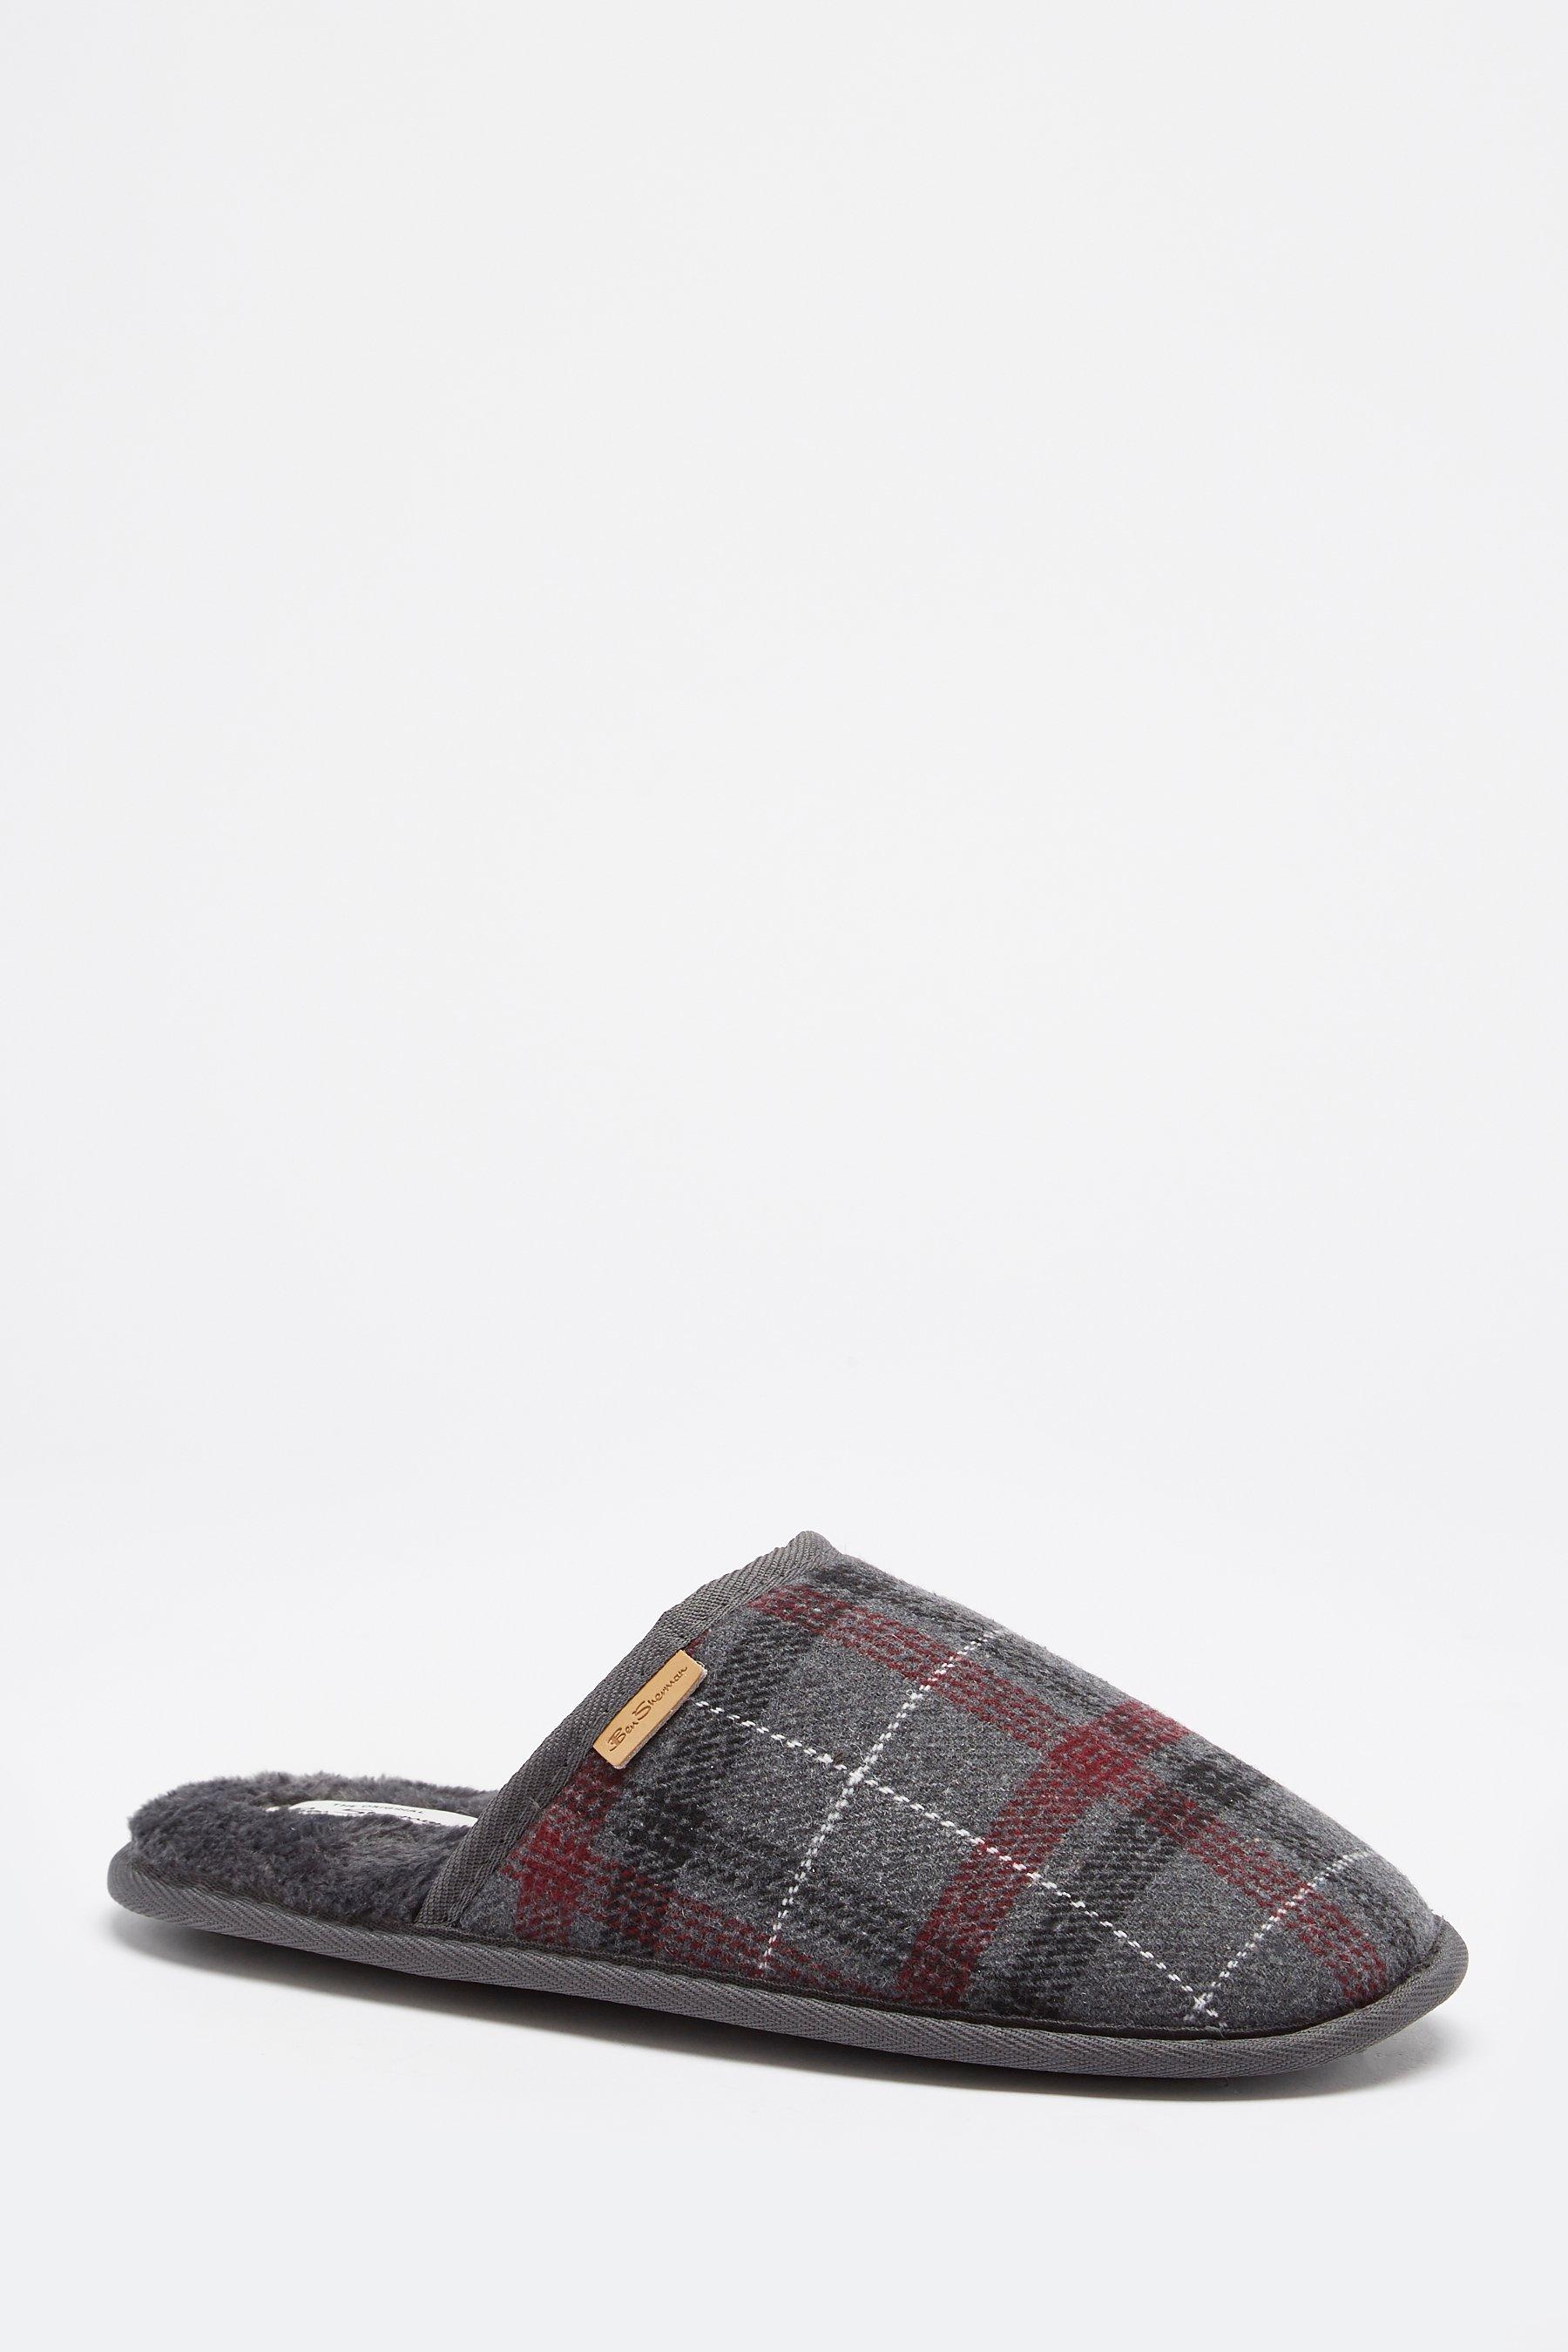 ben sherman grey check mule slippers boxed gift - mens - size: 7-8